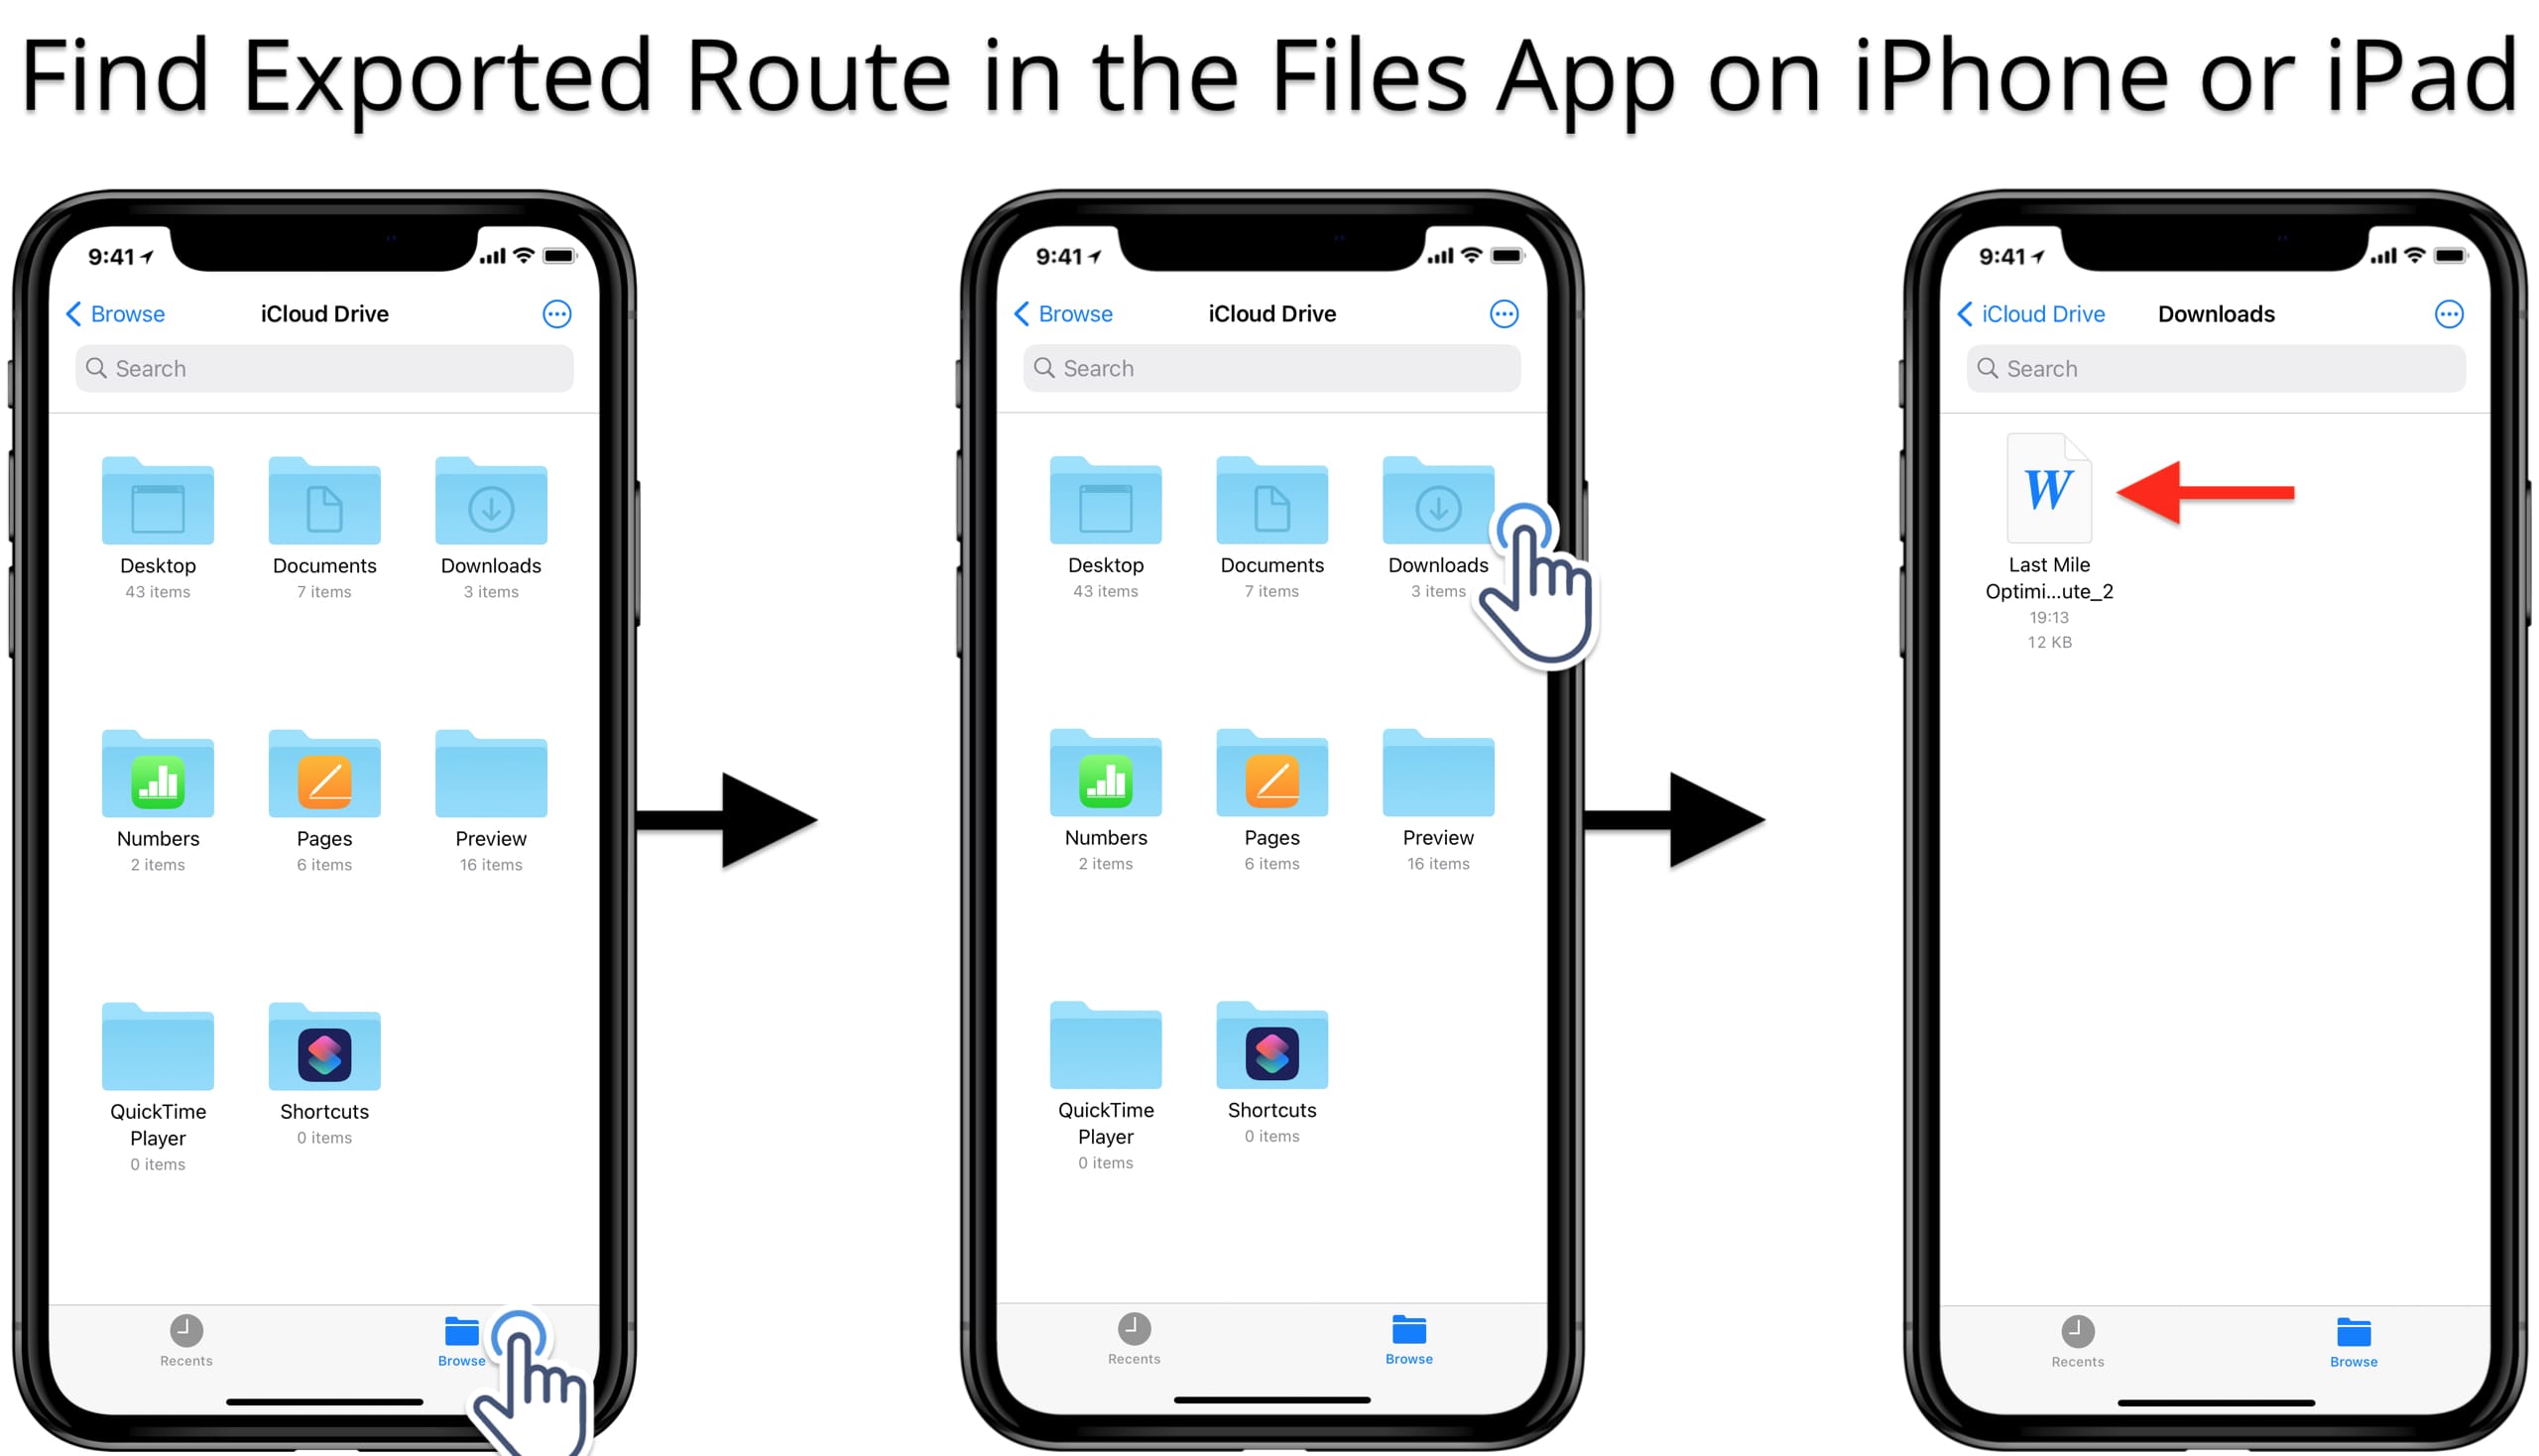 Find downloaded route planner routes in iPad or iPhone internal storage or iCloud.